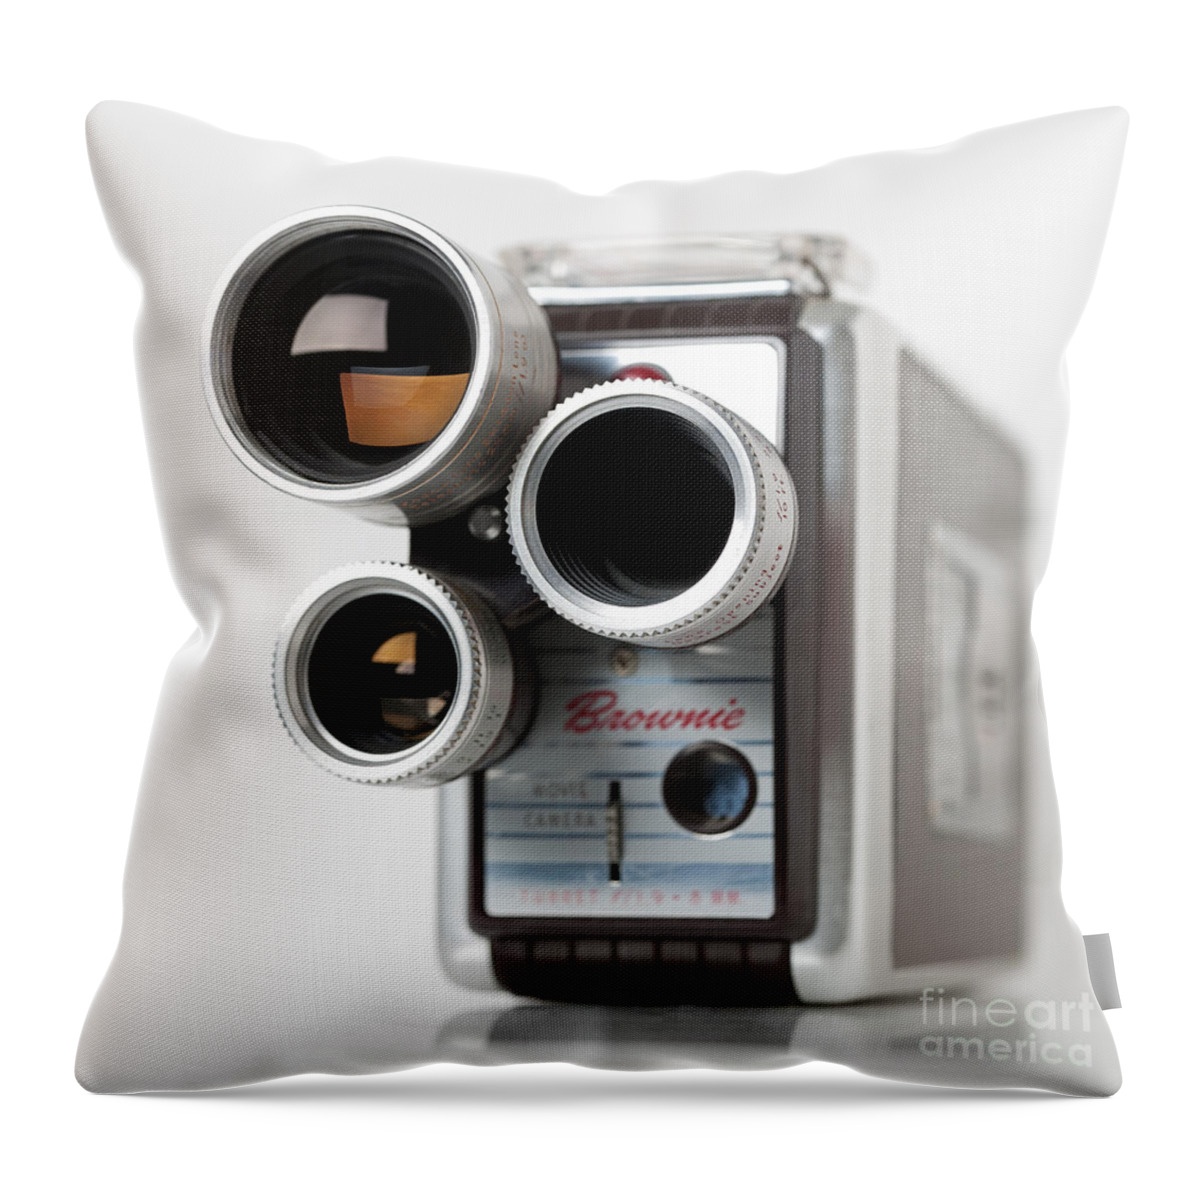 Movie Camera Throw Pillow featuring the photograph Brownie Movie Camera by Art Whitton